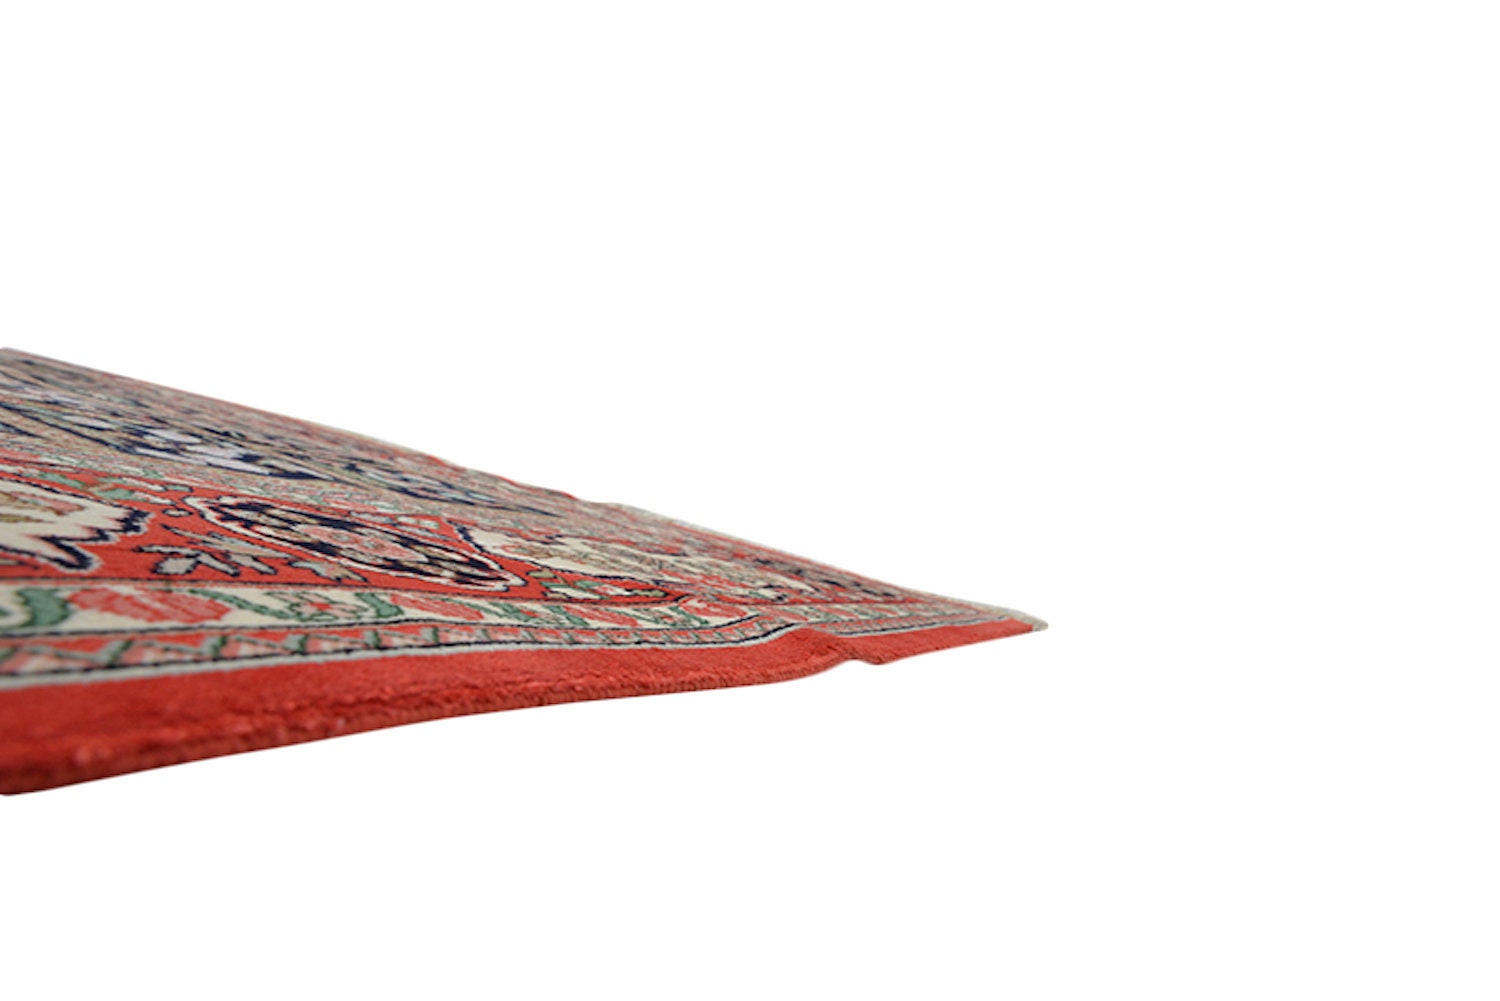 Silk Oriental 5 x 8 Turkish Antique Rug, Red Pink And Black Rug, Floral Traditional Design, Hand knotted with Dyed Silk, One of a Kind